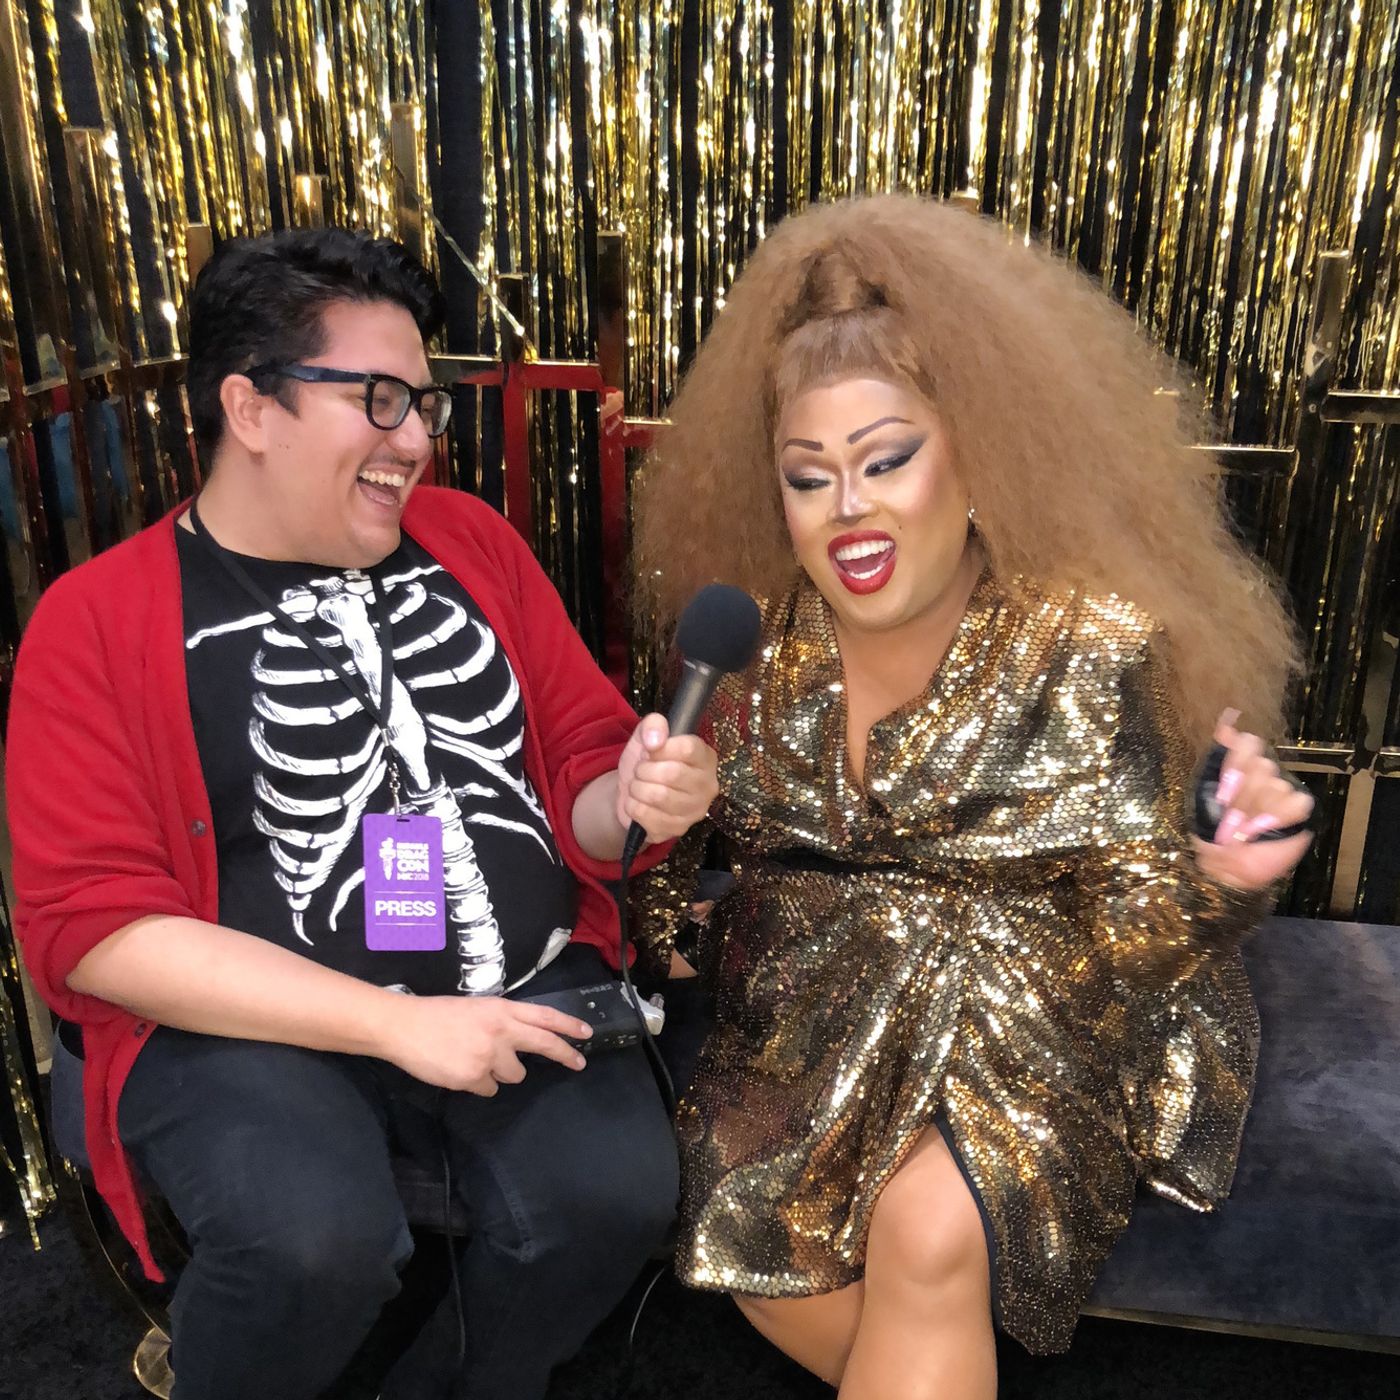 Thumbnail for "Episode 94: FavyFav Teleports Us To RuPaul's DragCon NYC!".